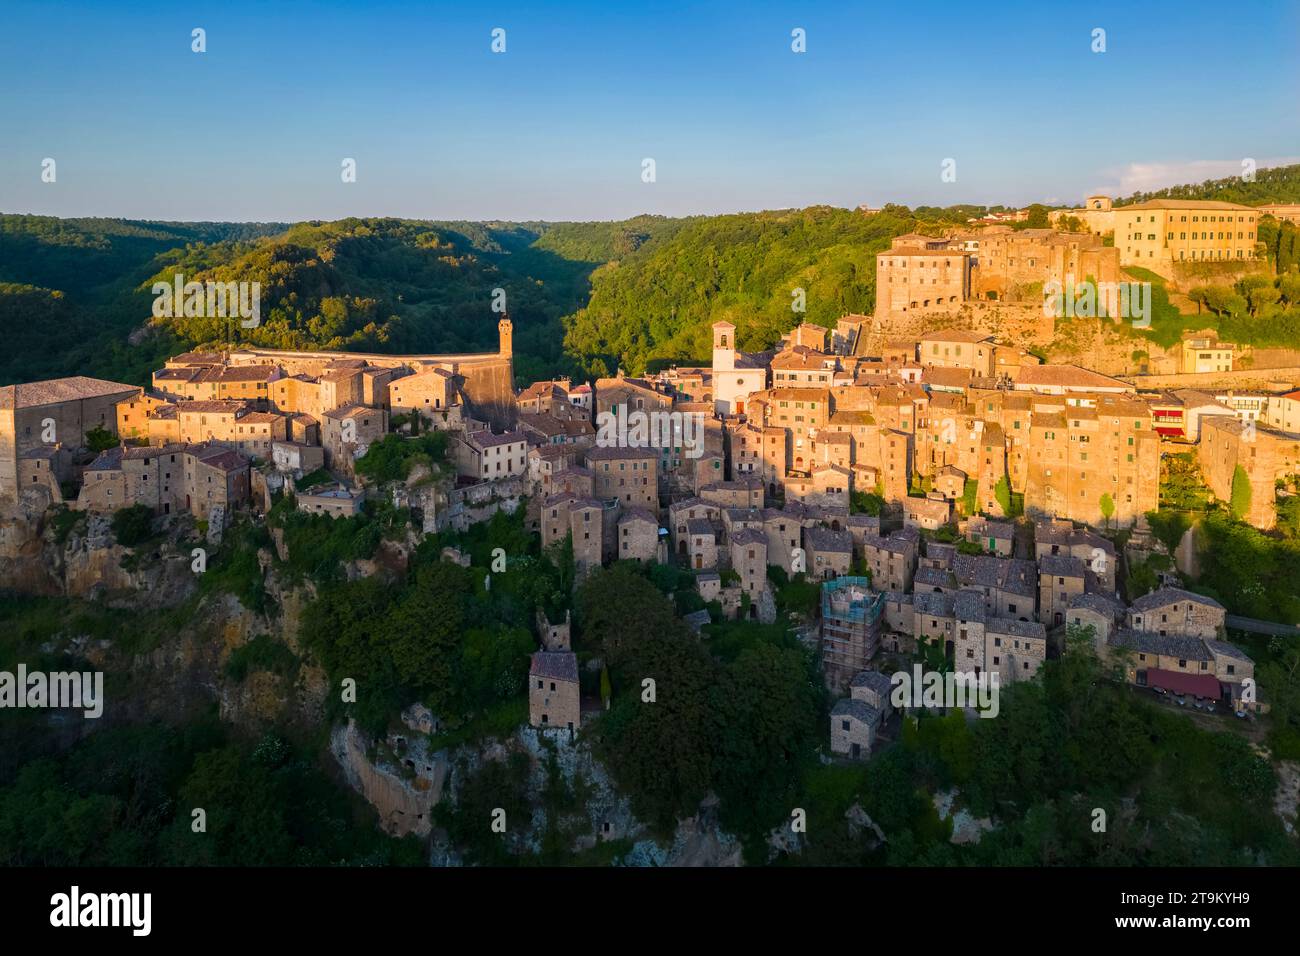 Aerial view of the old town of Sorano at sunset. Grosseto district, Tuscany, Italy, Europe. Stock Photo